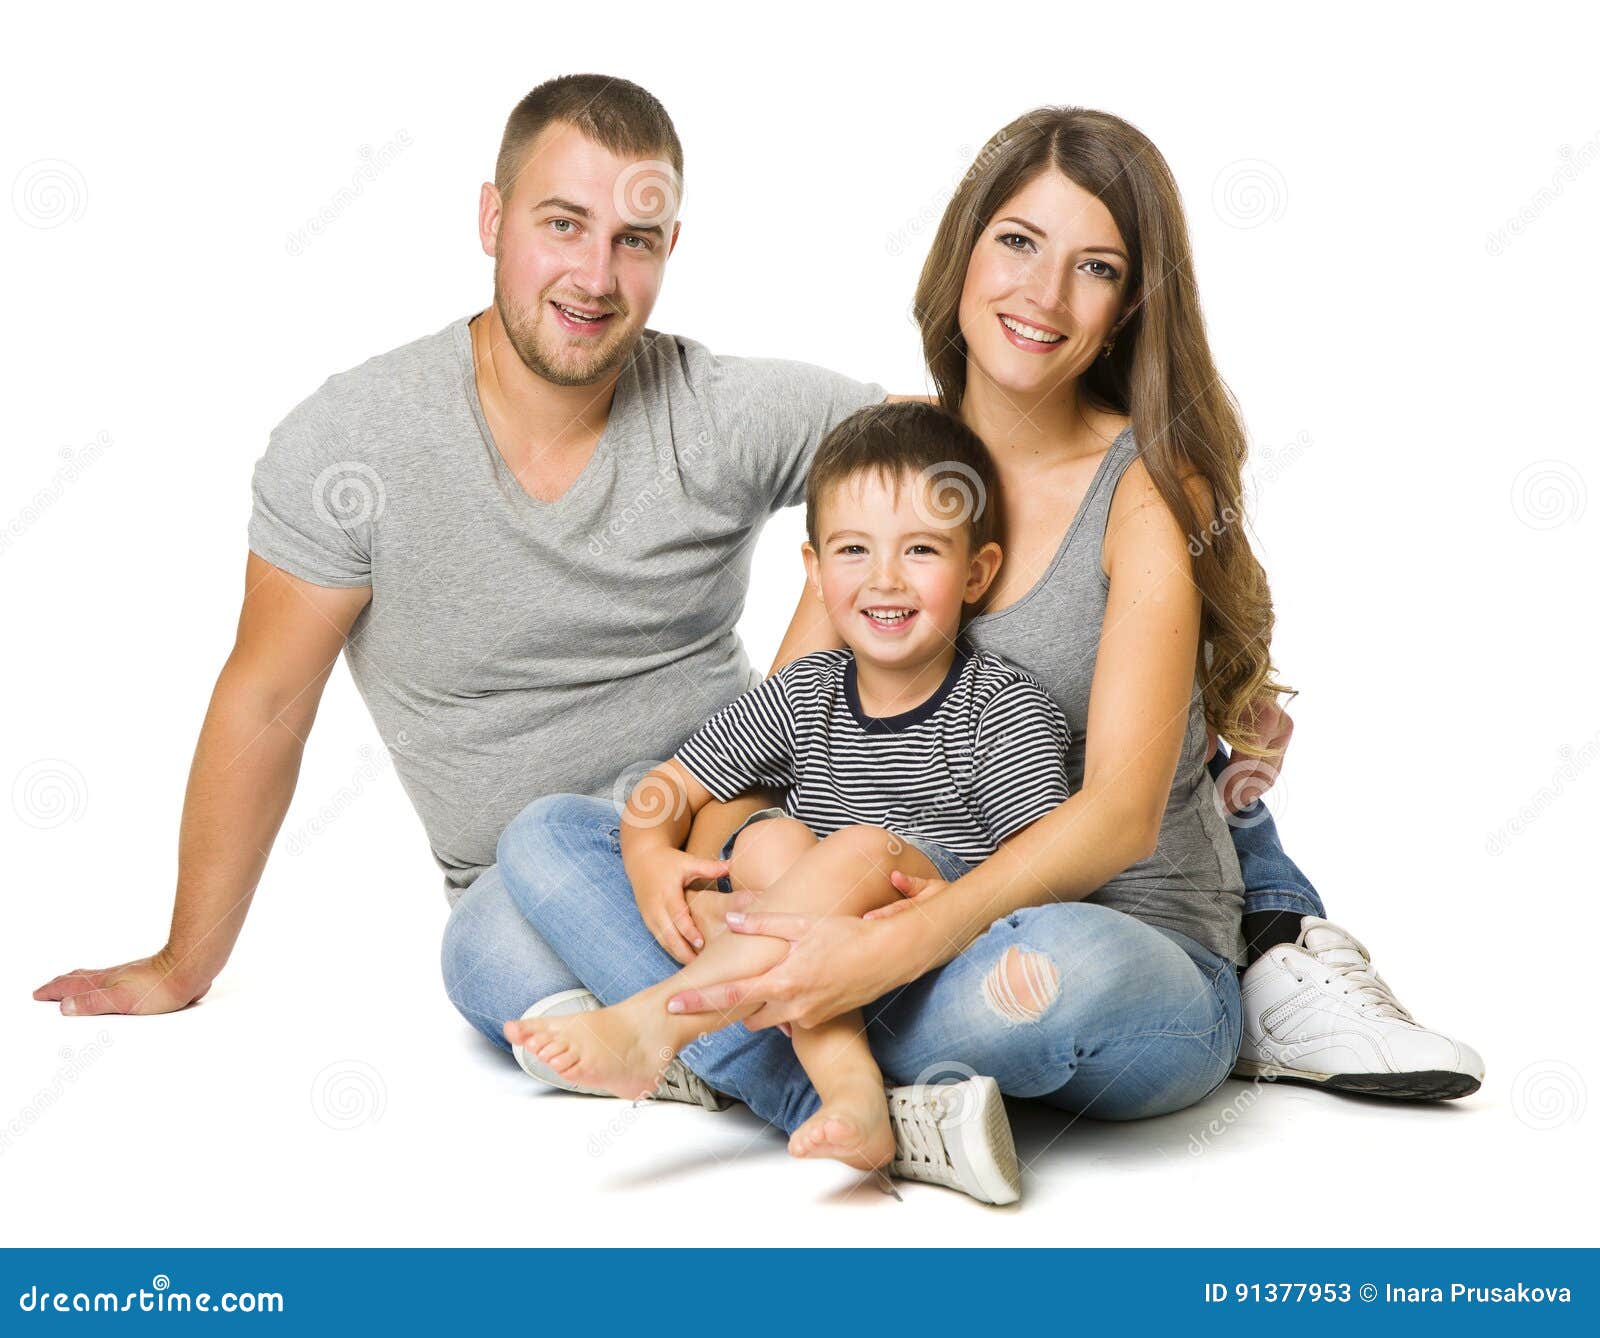 family over white background, three people, parents with child